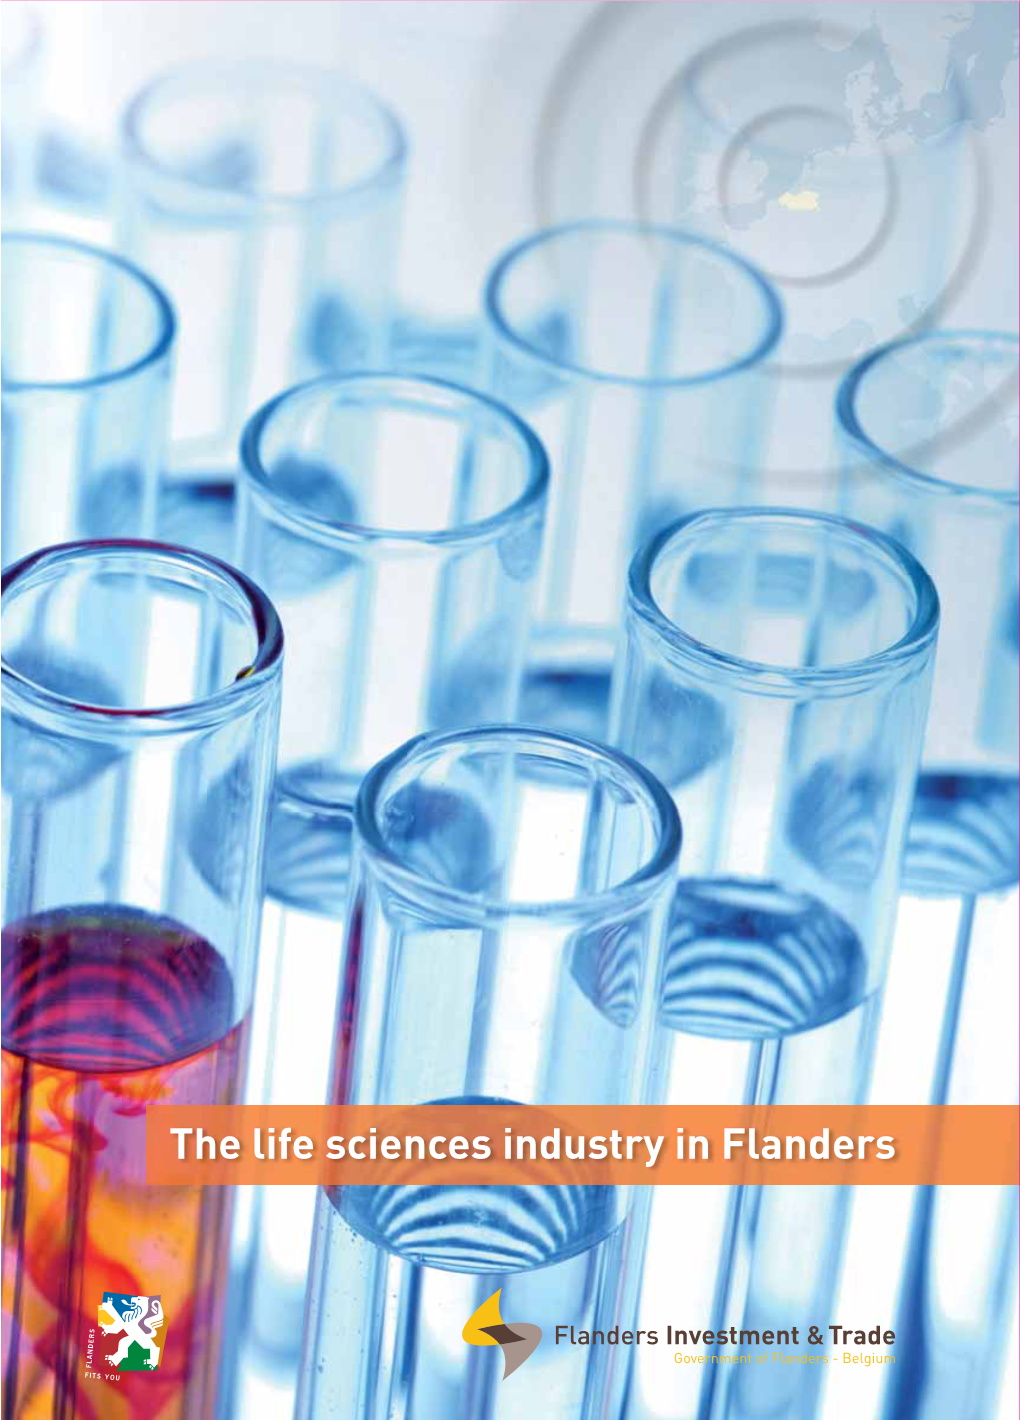 The Life Sciences Industry in Flanders 10 Reasons Why Flanders Is in Pole Position